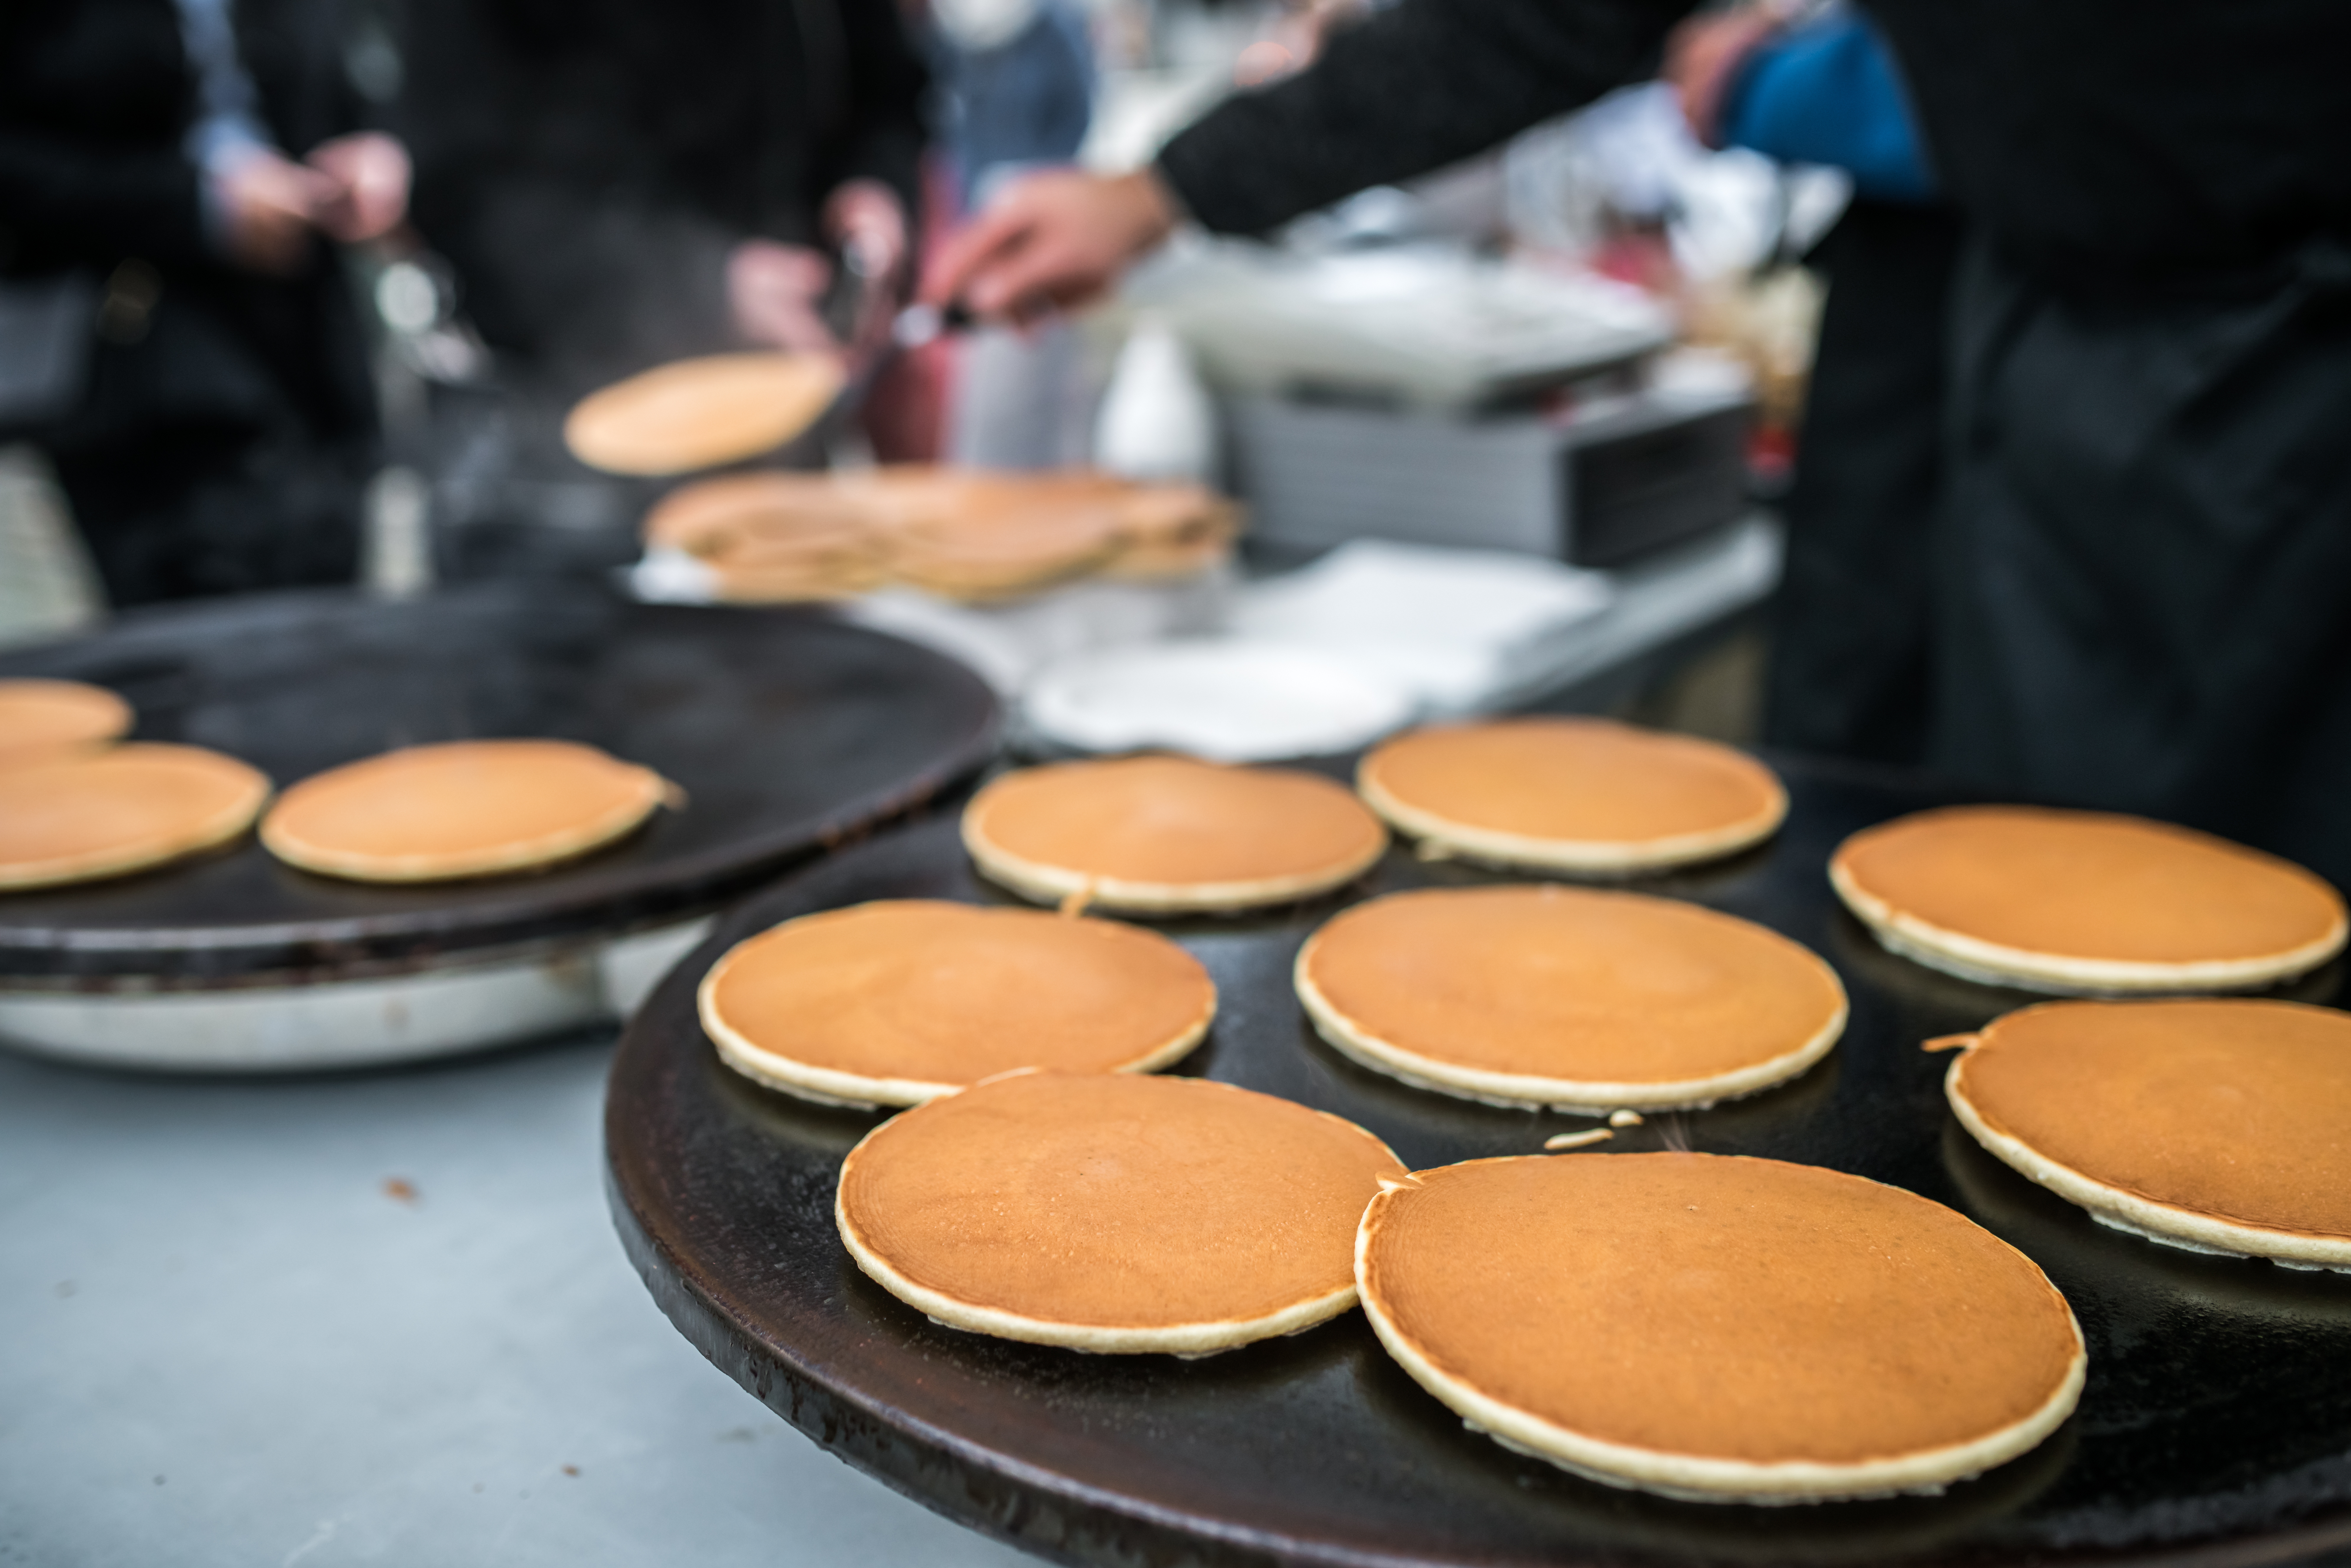 Image of freshly cooked pancakes on a large griddle, being prepared at an outdoor community event, with blurred figures of people serving in the background.